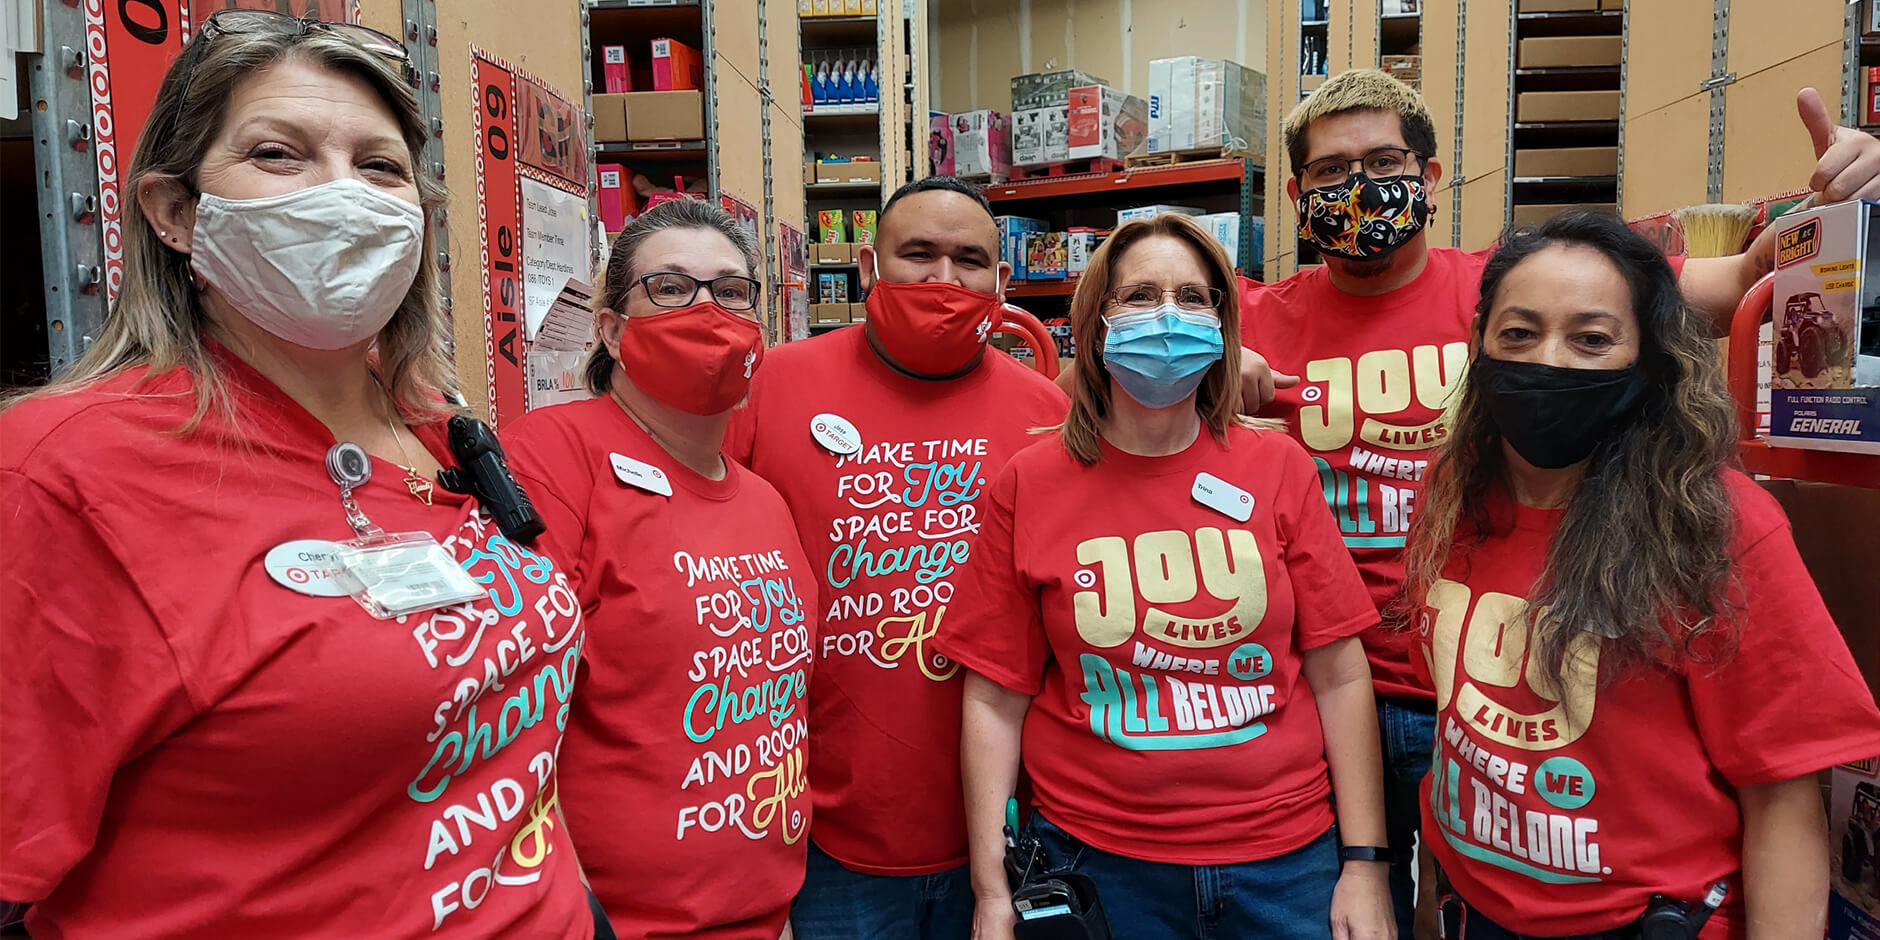 Six Target team members in red shirts with inclusive sayings and masks smile for the camera.